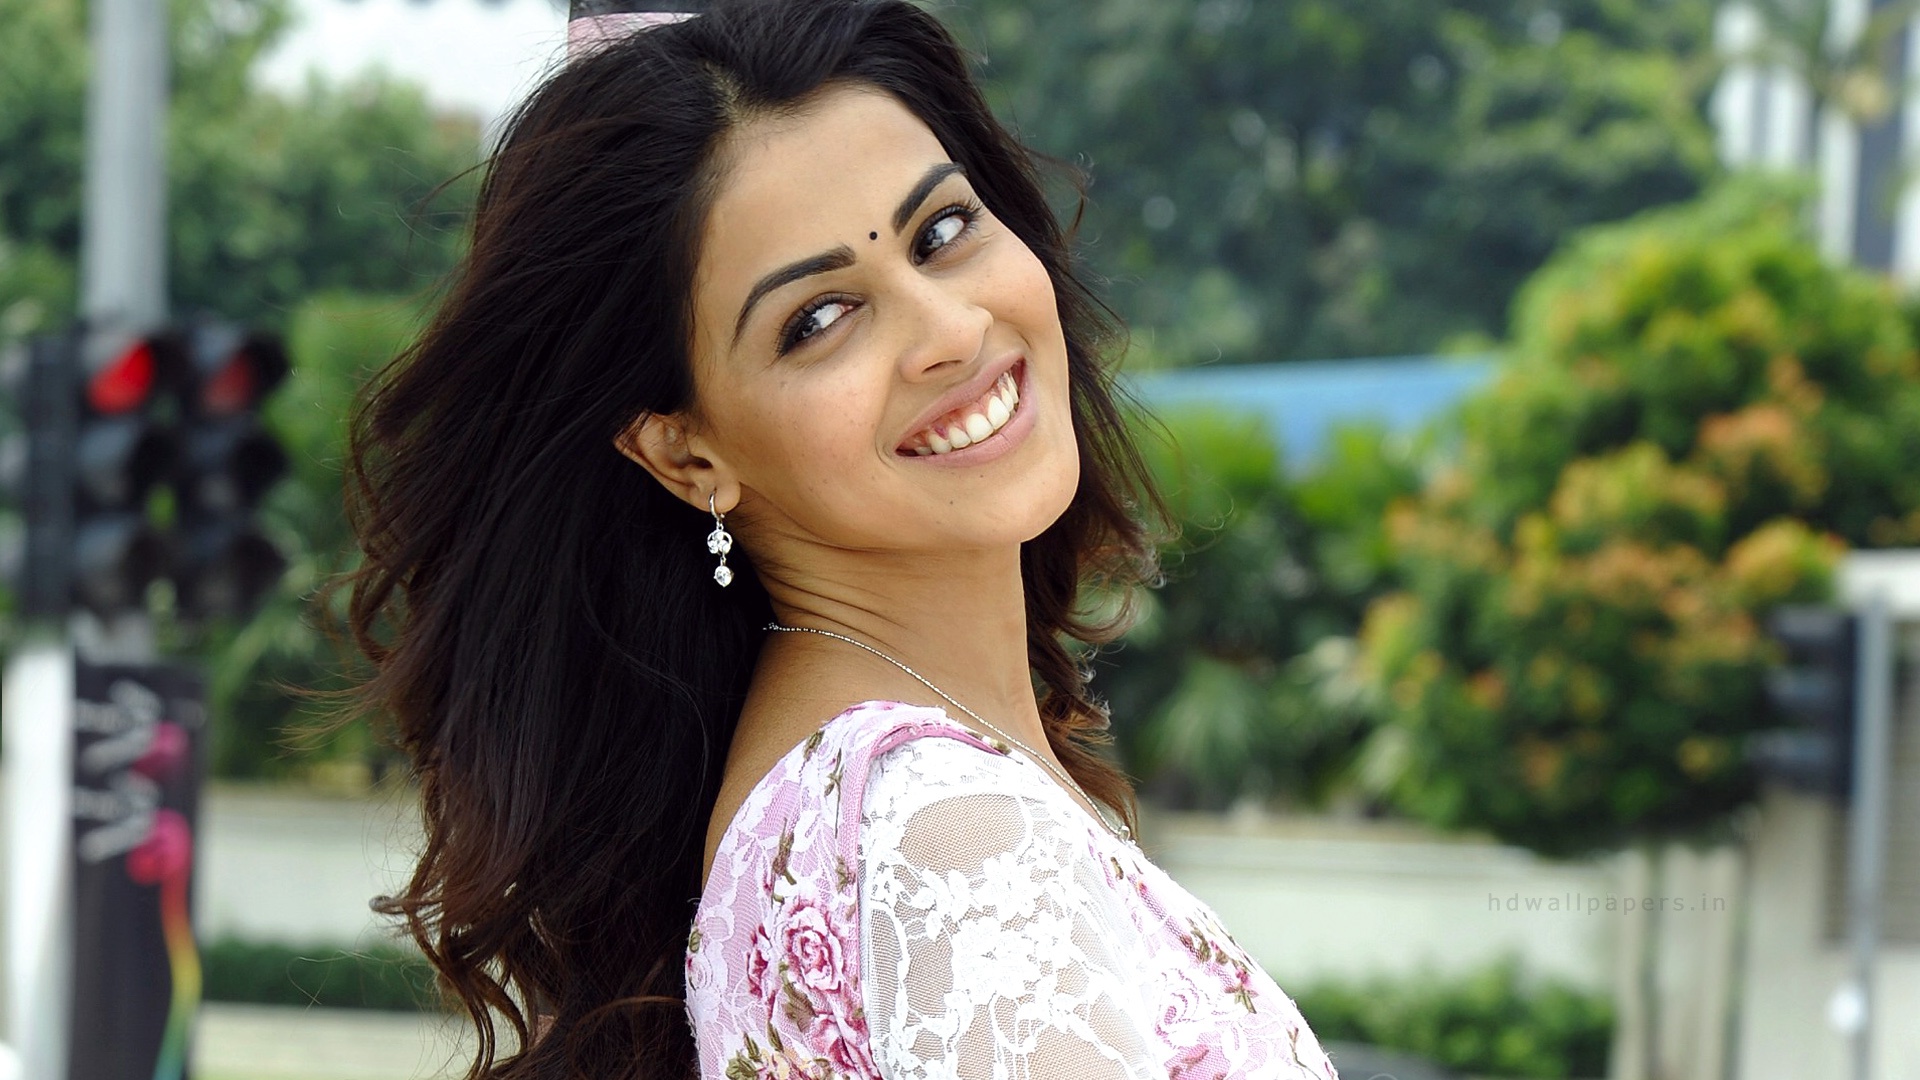 Genelia DSouza Wallpapers High Resolution and Quality Download